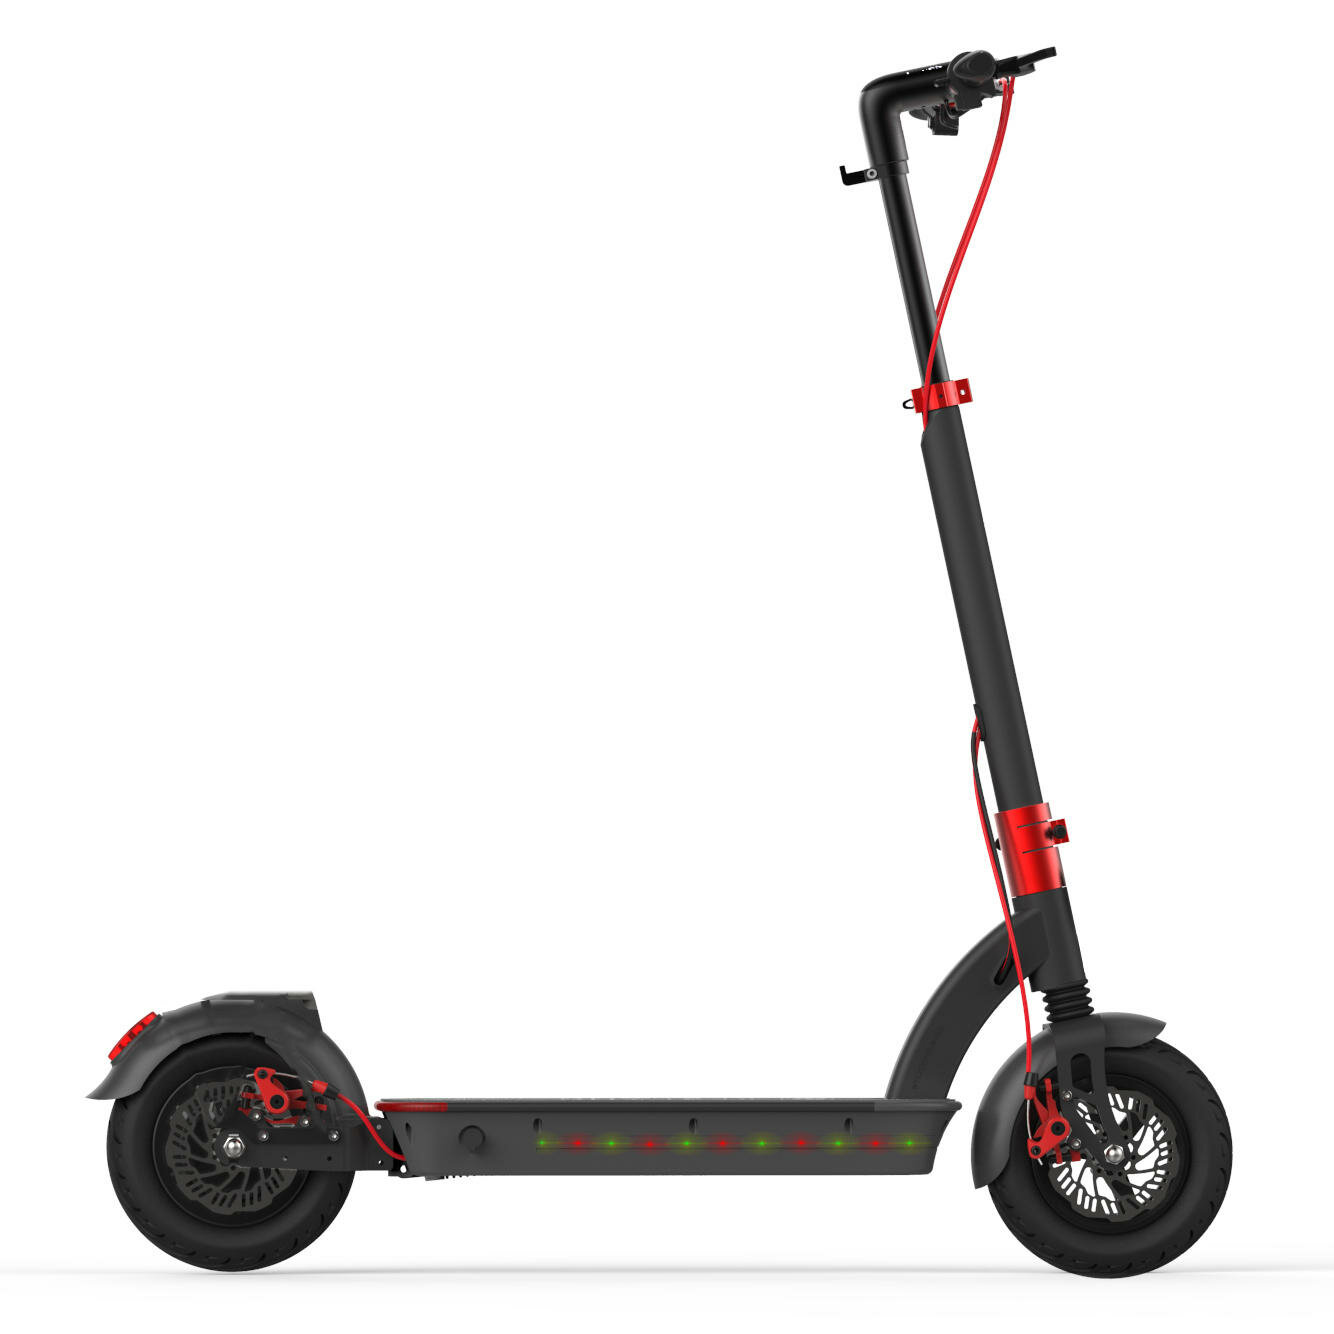 best price,aerlang,h6,v2,48v,500w,17.5a,electric,scooter,eu,coupon,price,discount